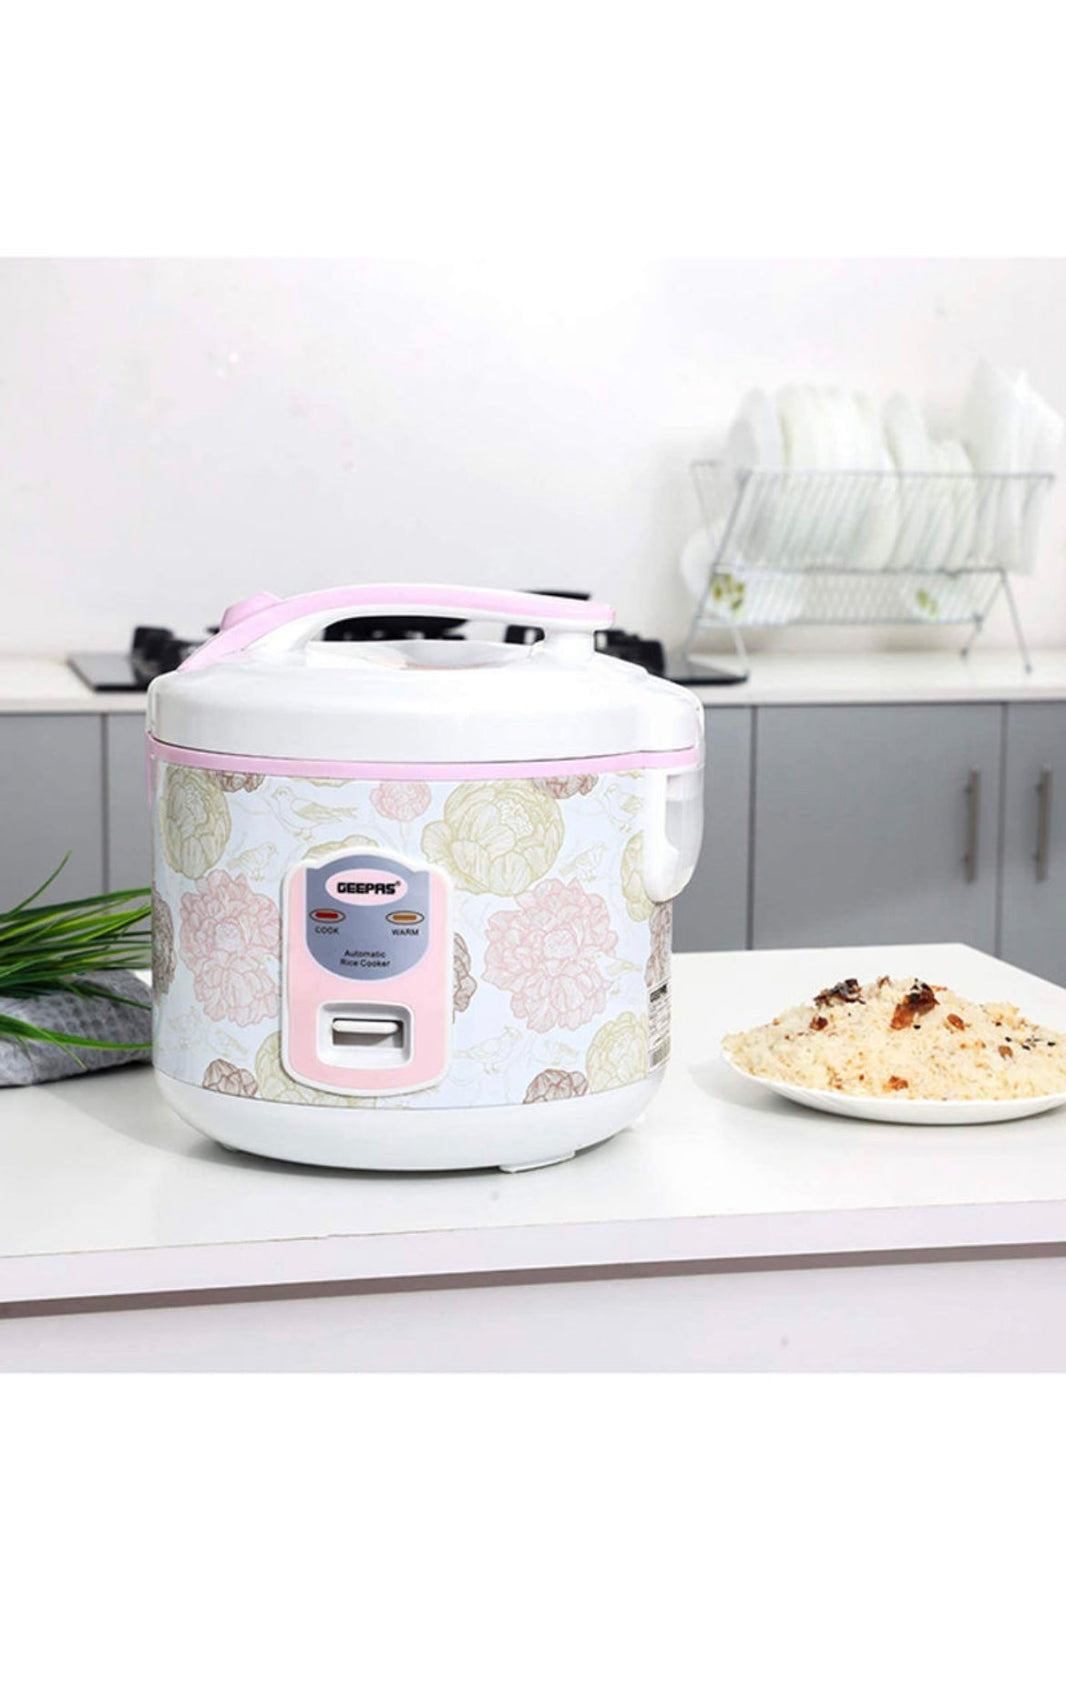 Geepas Rice Cooker 1.5 l 500 W